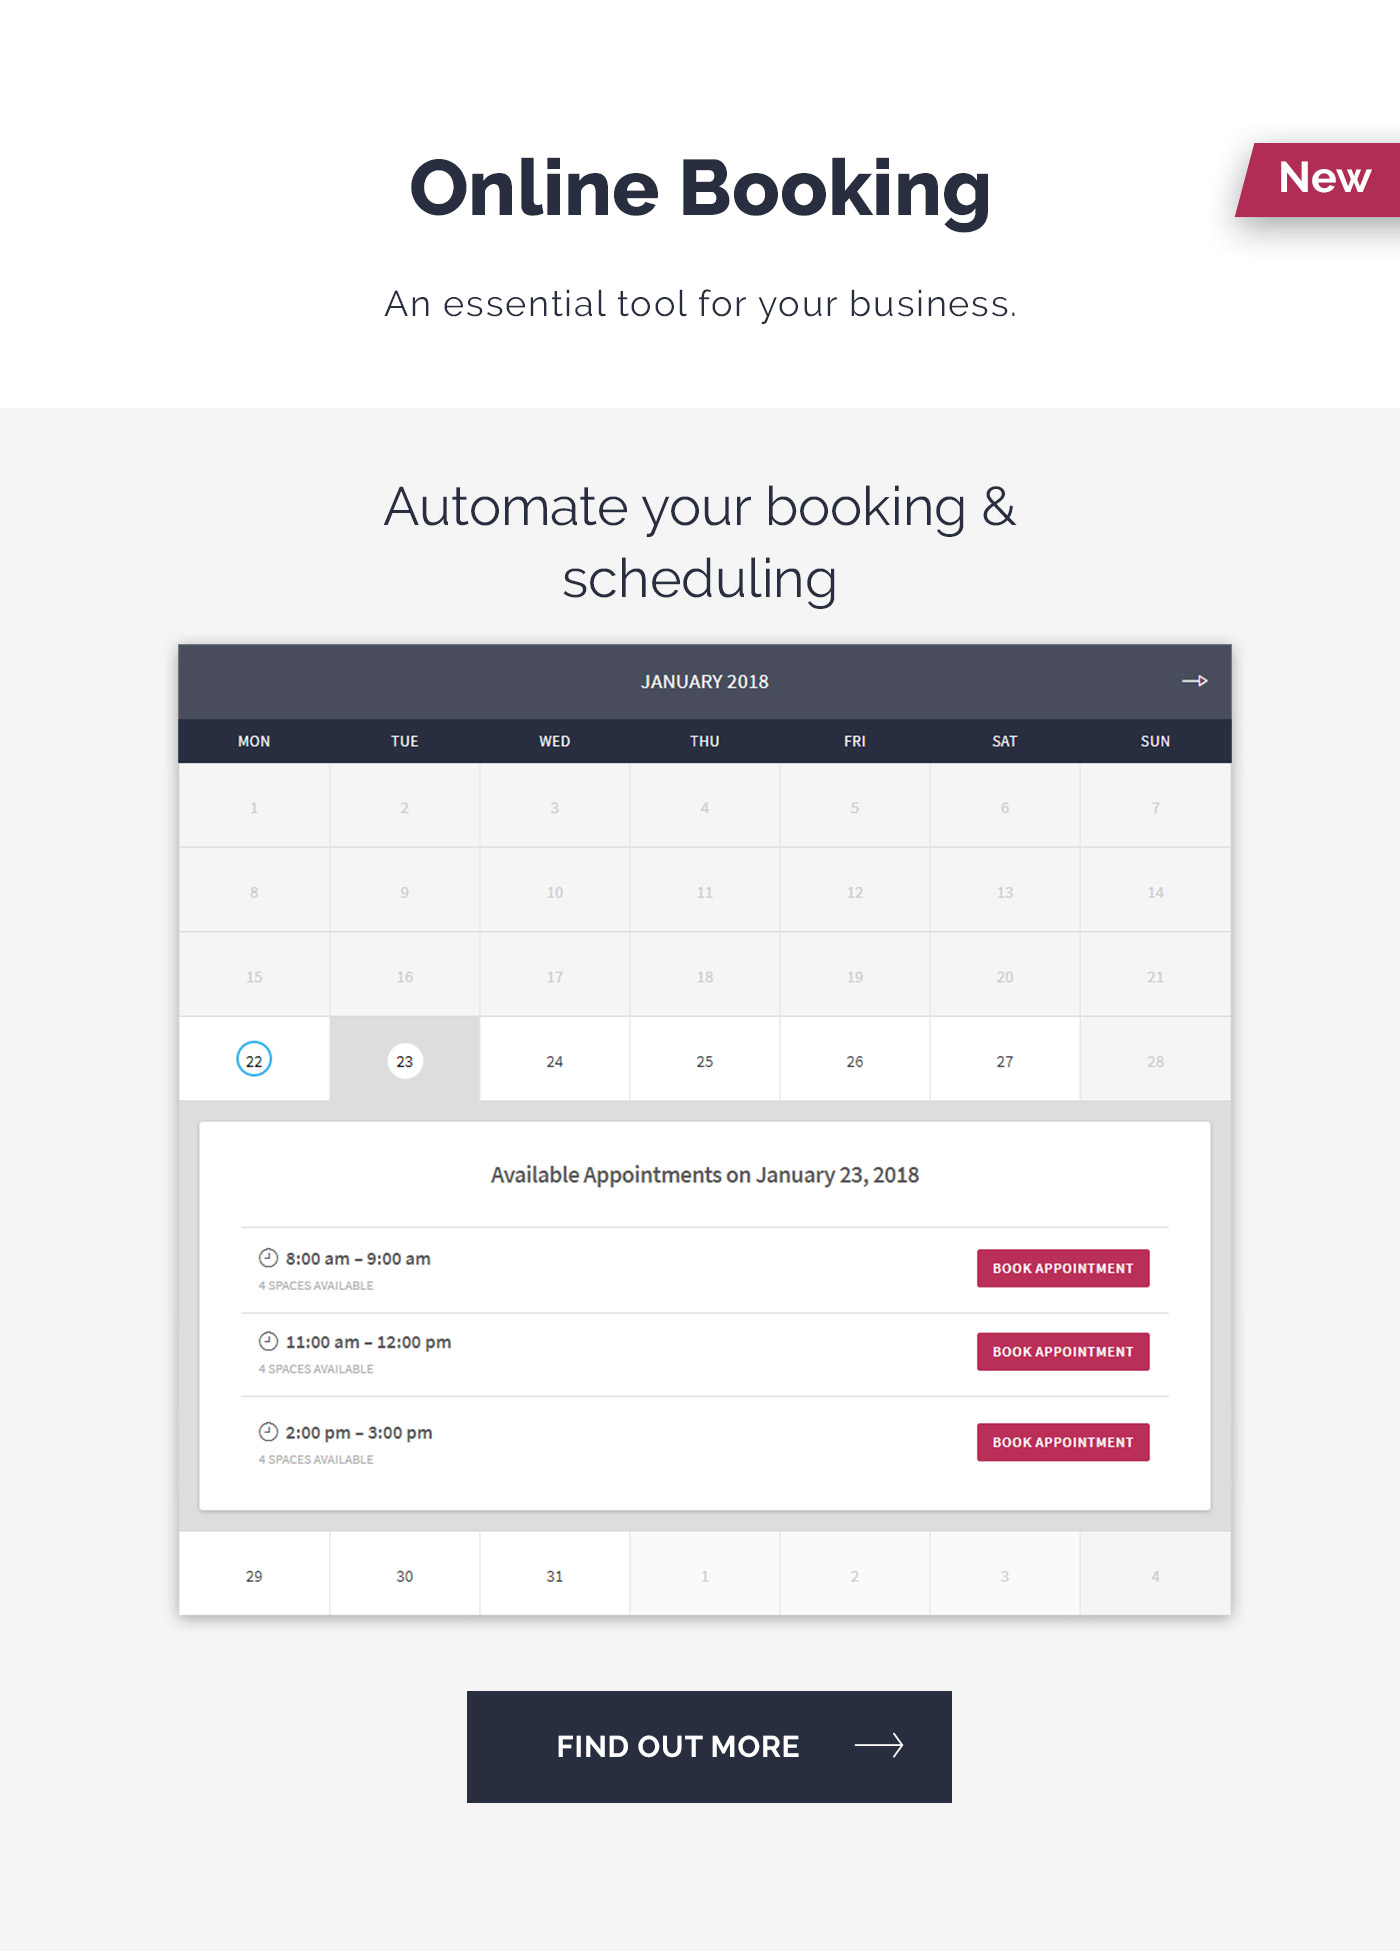 RedSeal online booking feature